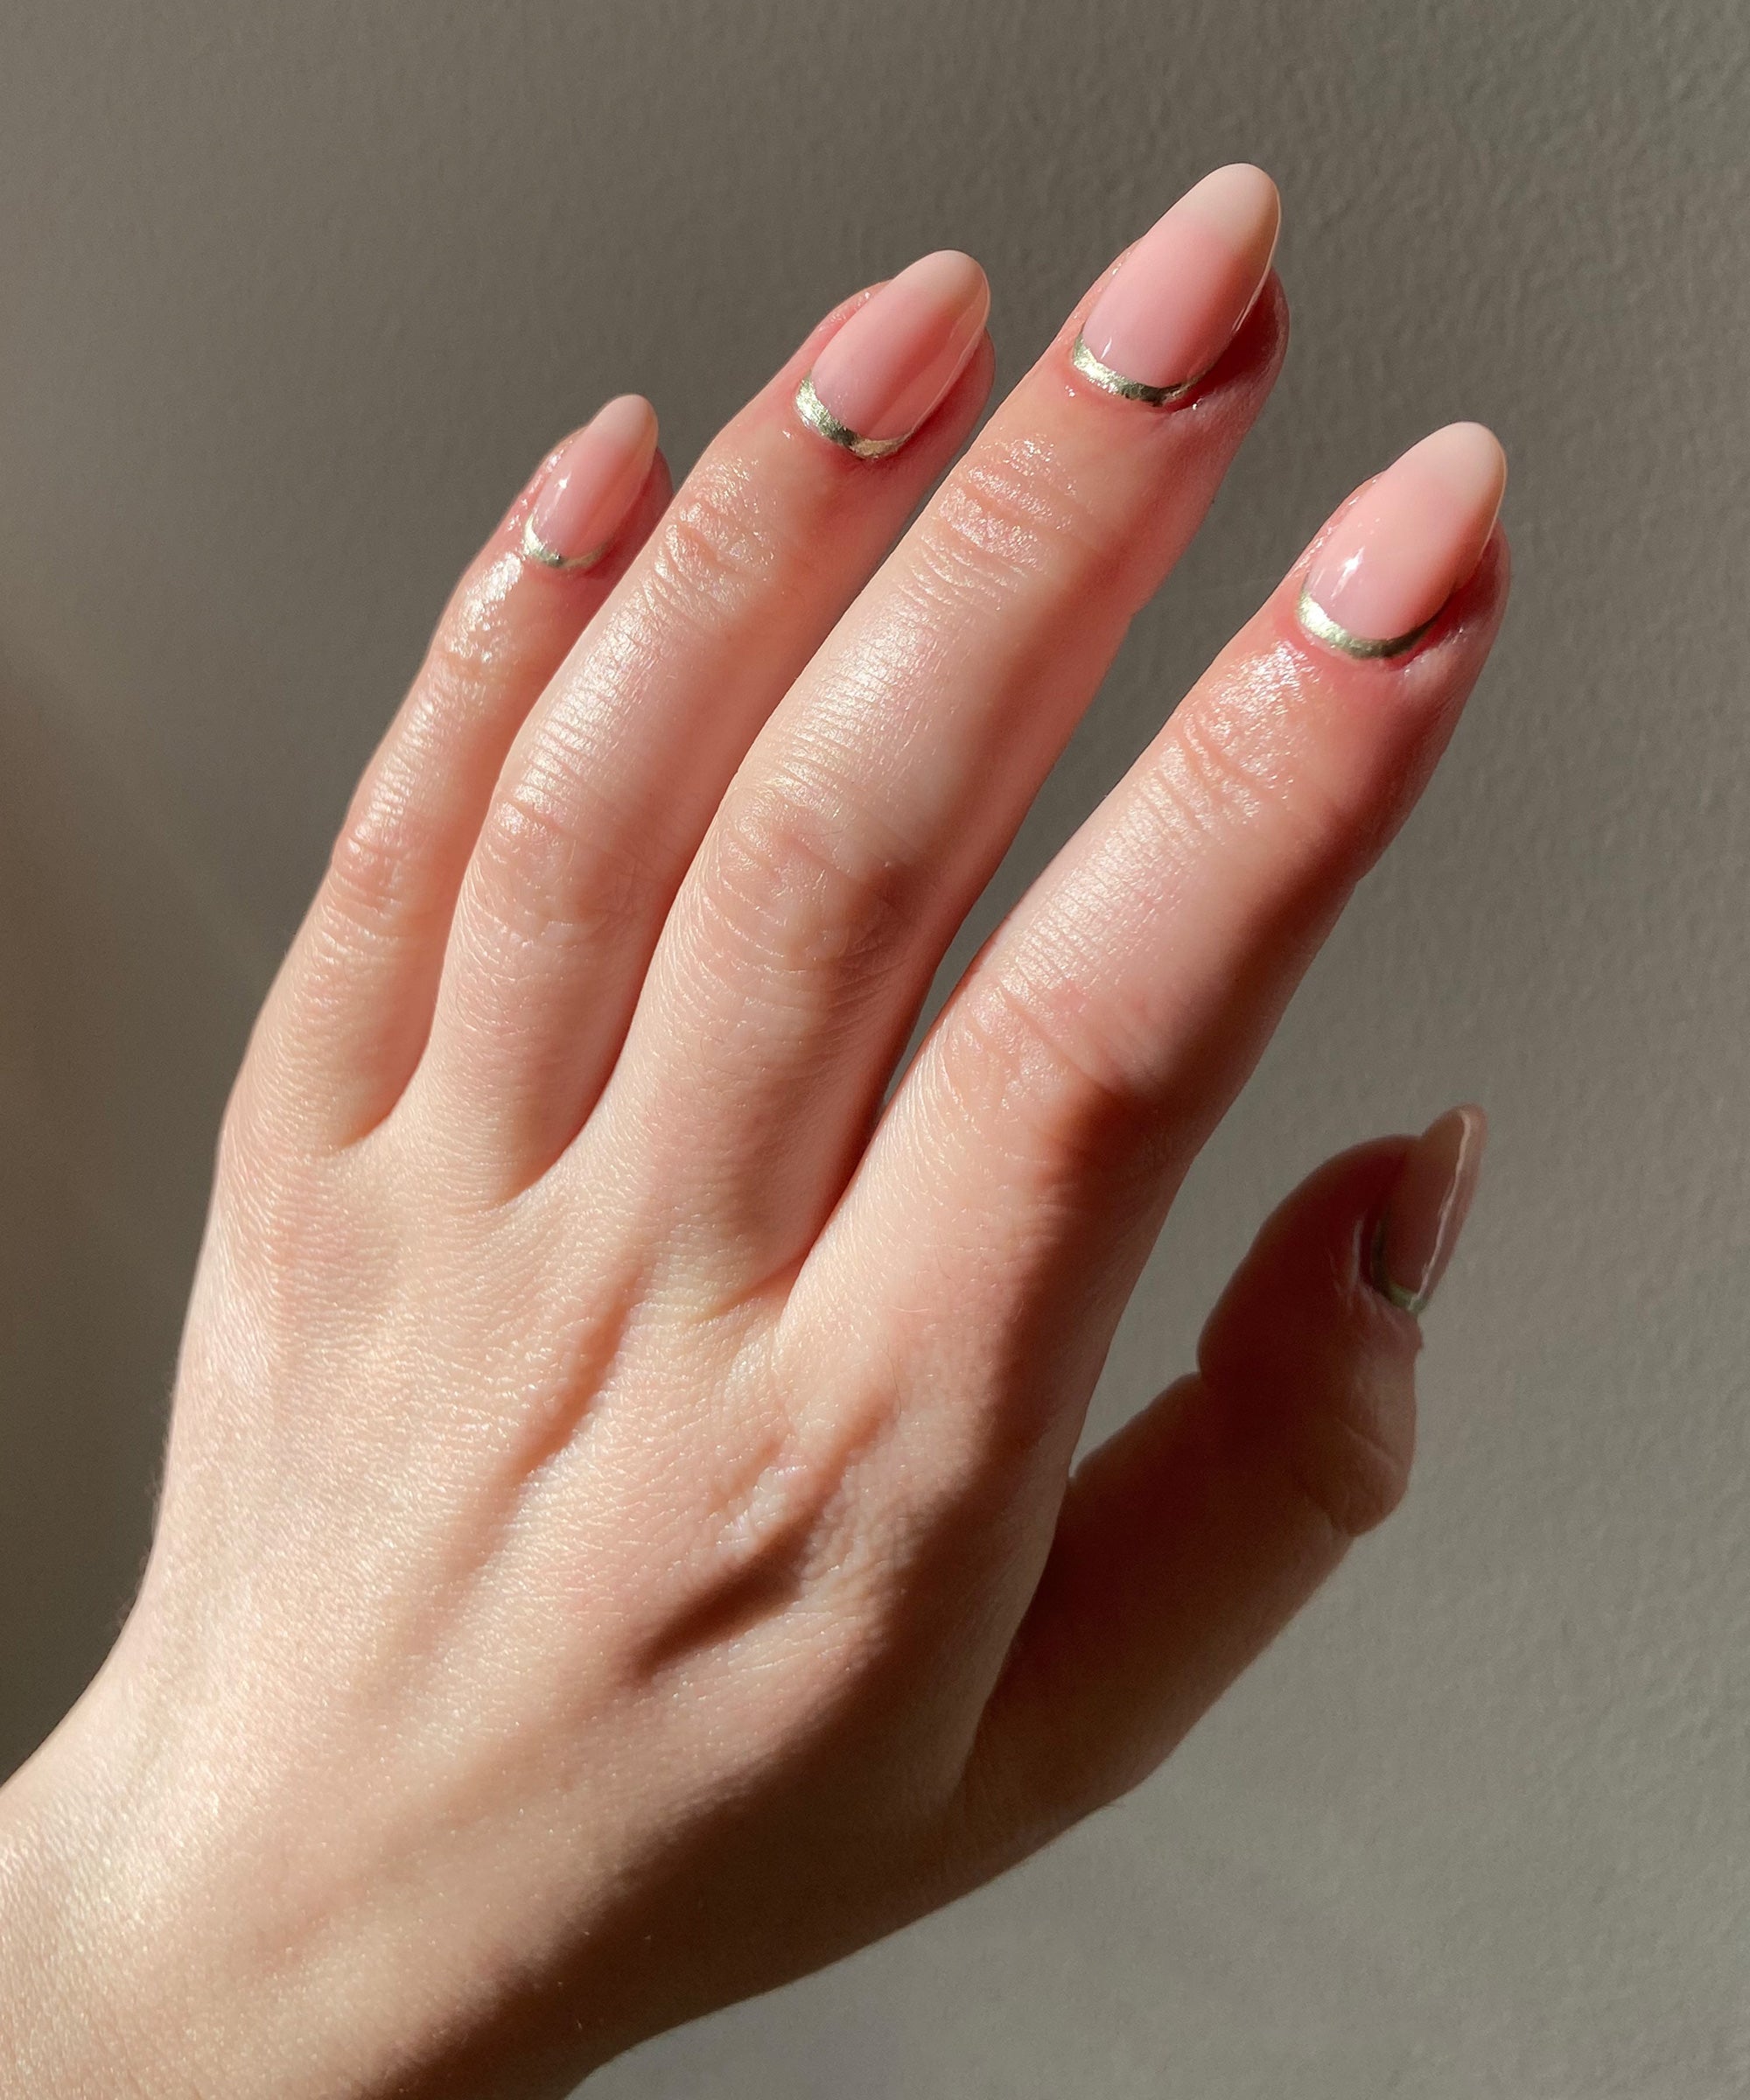 Clean Girl Nails Trend: 15 Clean Girl Nail Ideas | IPSY